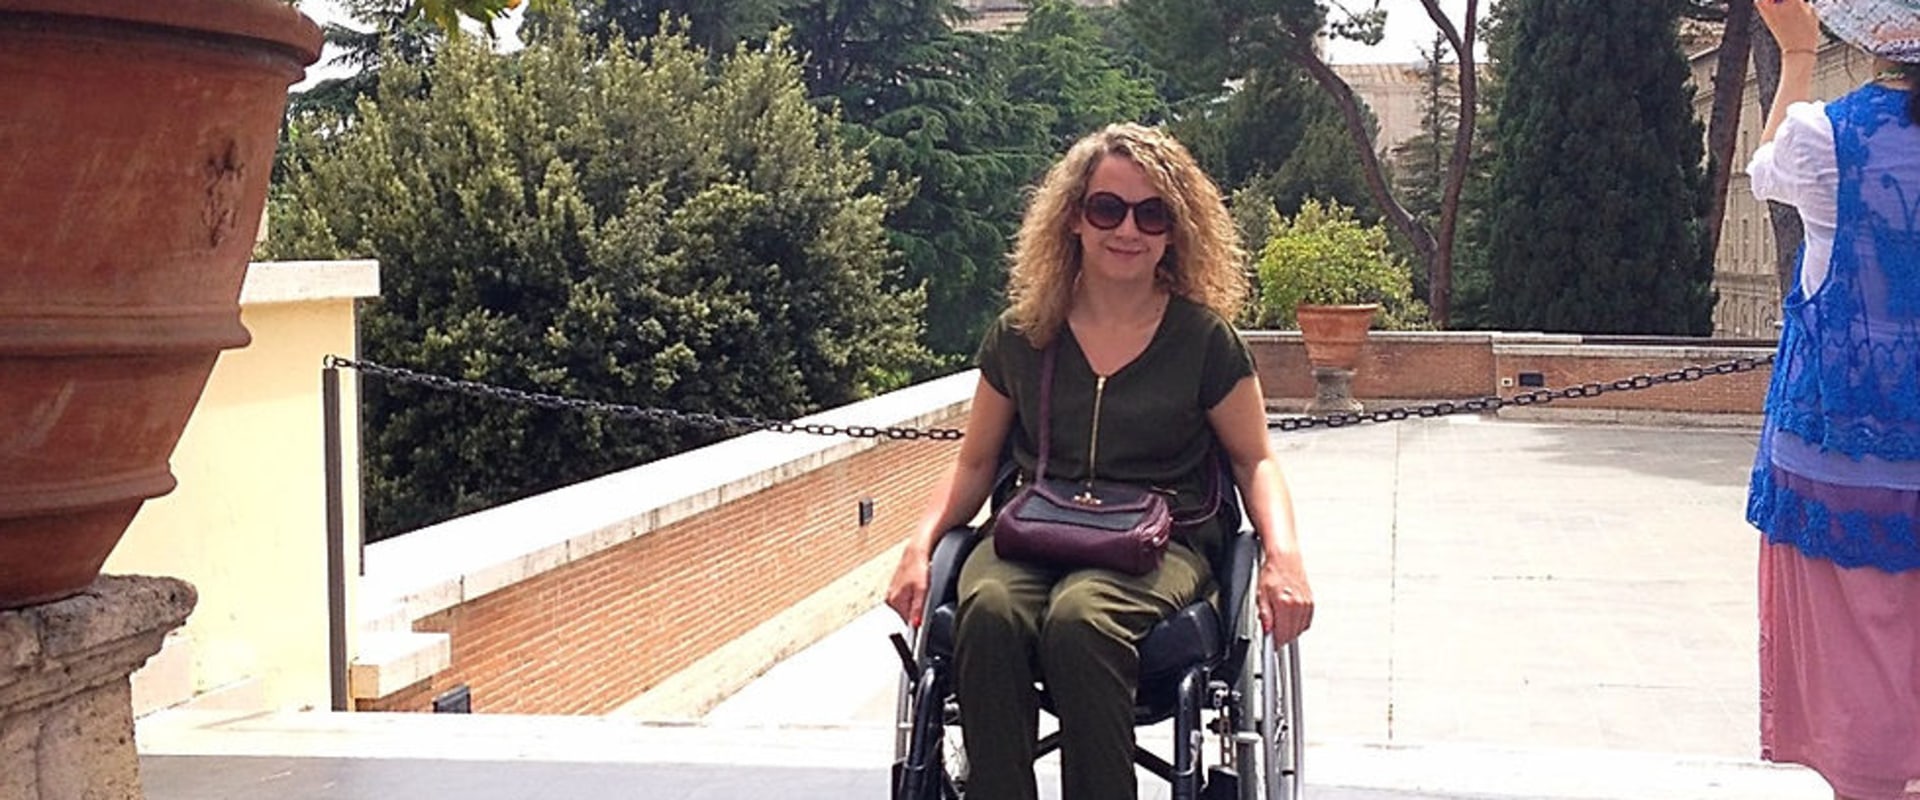 The Challenges Faced by Travelers with Disabilities When Visiting Churches